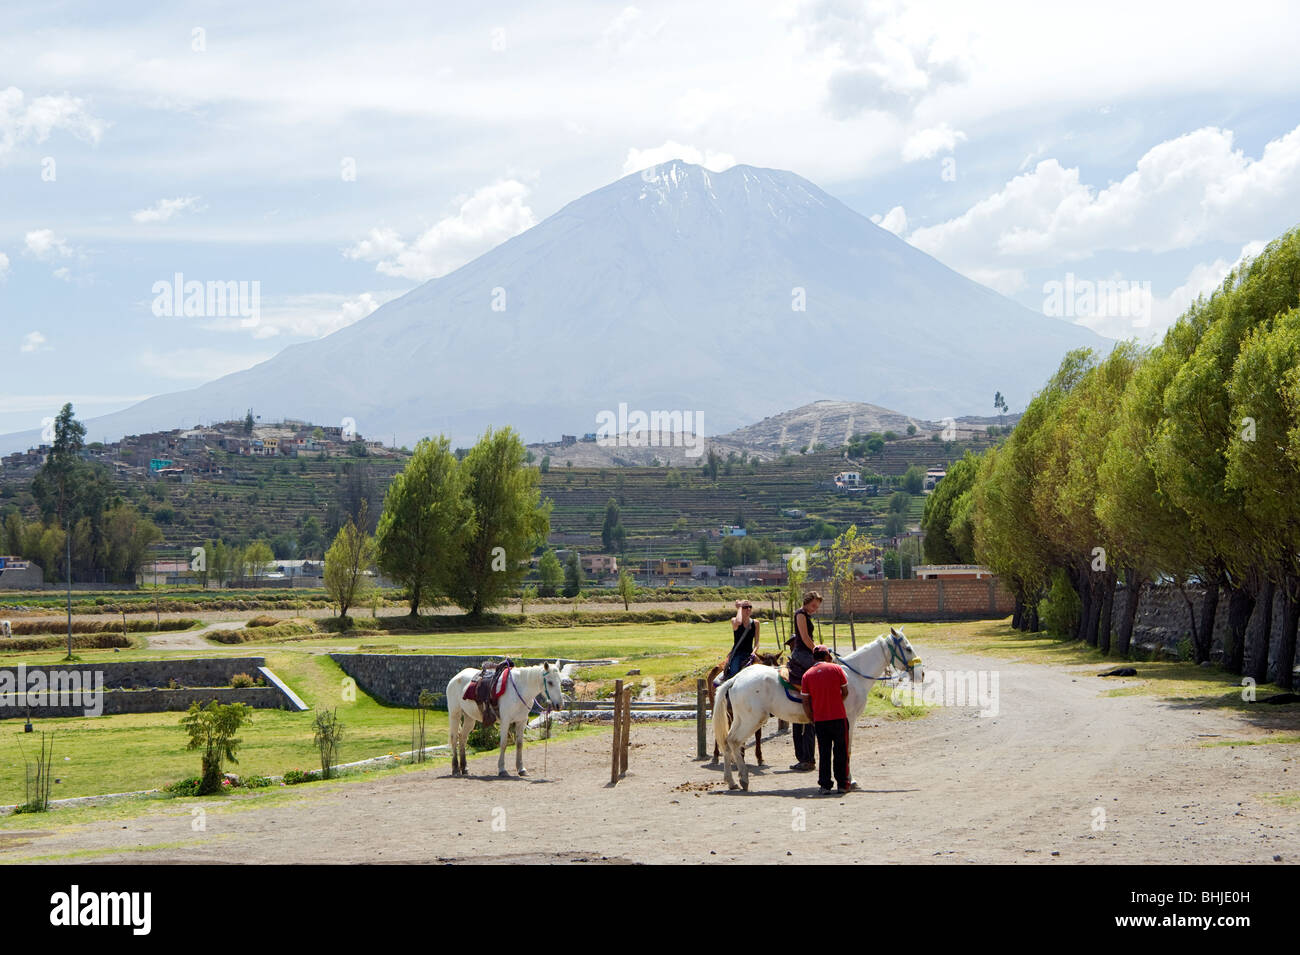 Tourists about to set off on a horse ride with a backdrop of a snow-capped volcano at Arequipa, Peru Stock Photo